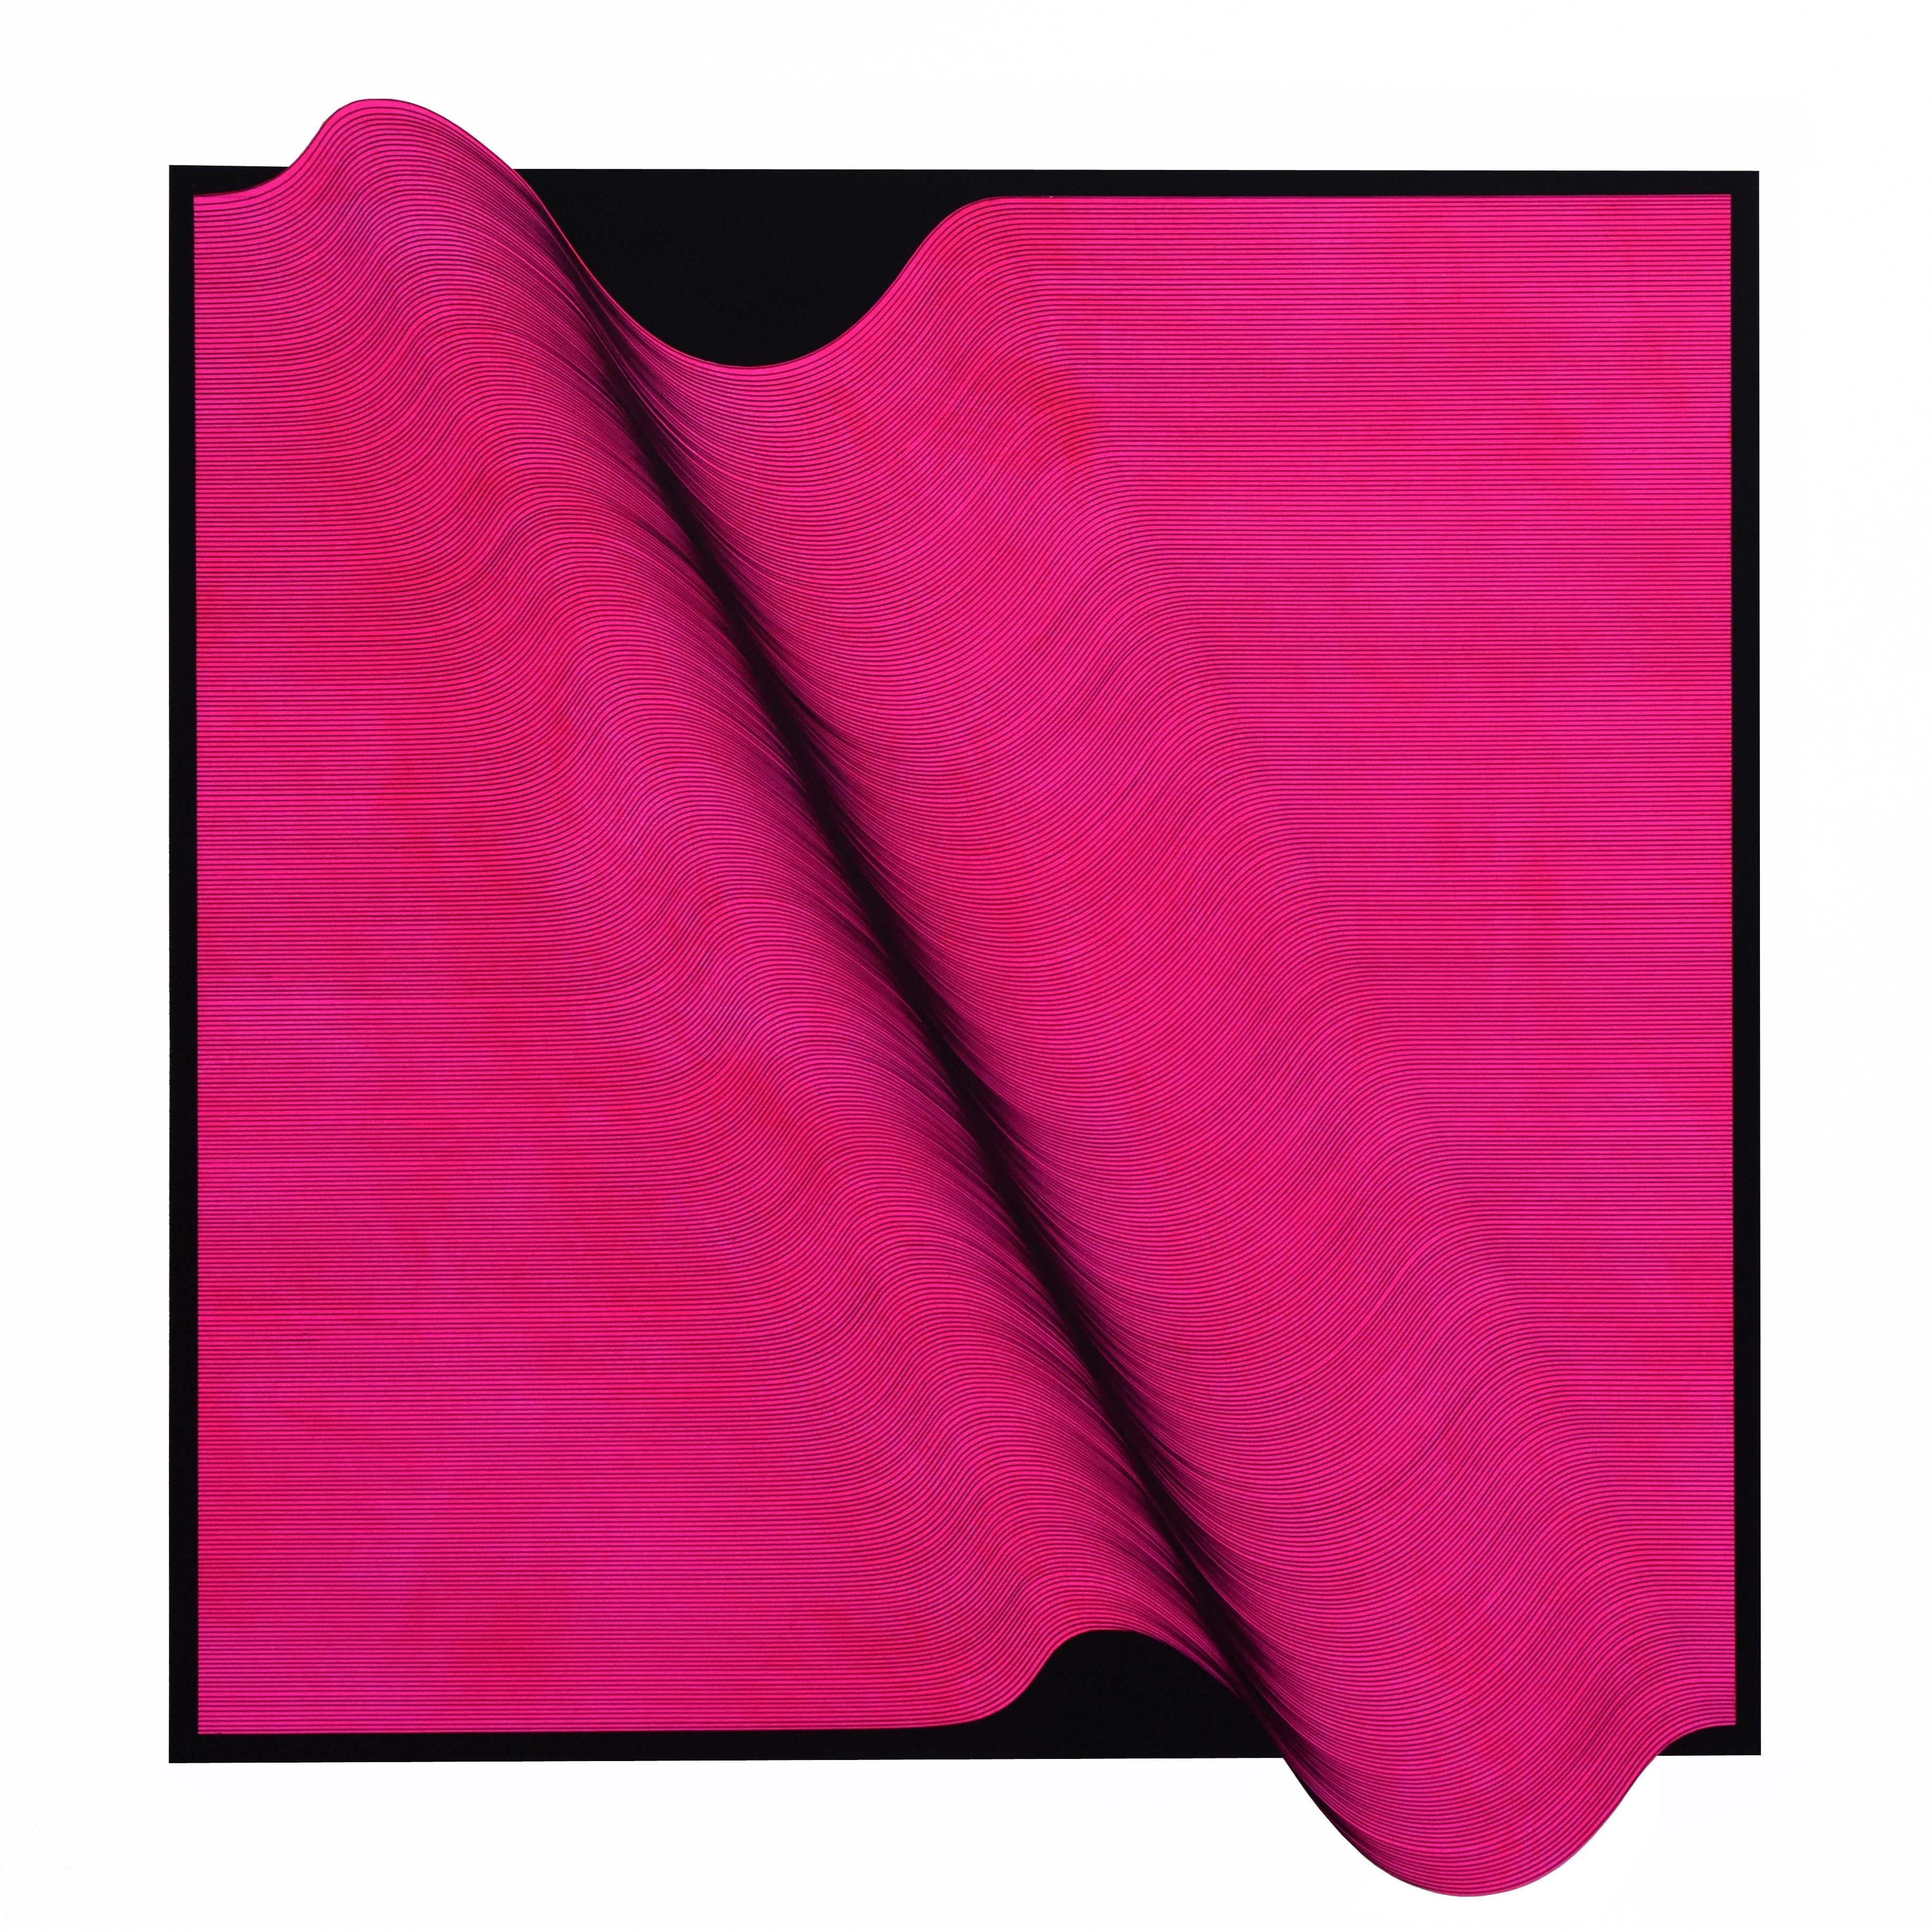 Roberto Lucchetta Abstract Painting - Pink Fluo Surface 2019 - abstract painting